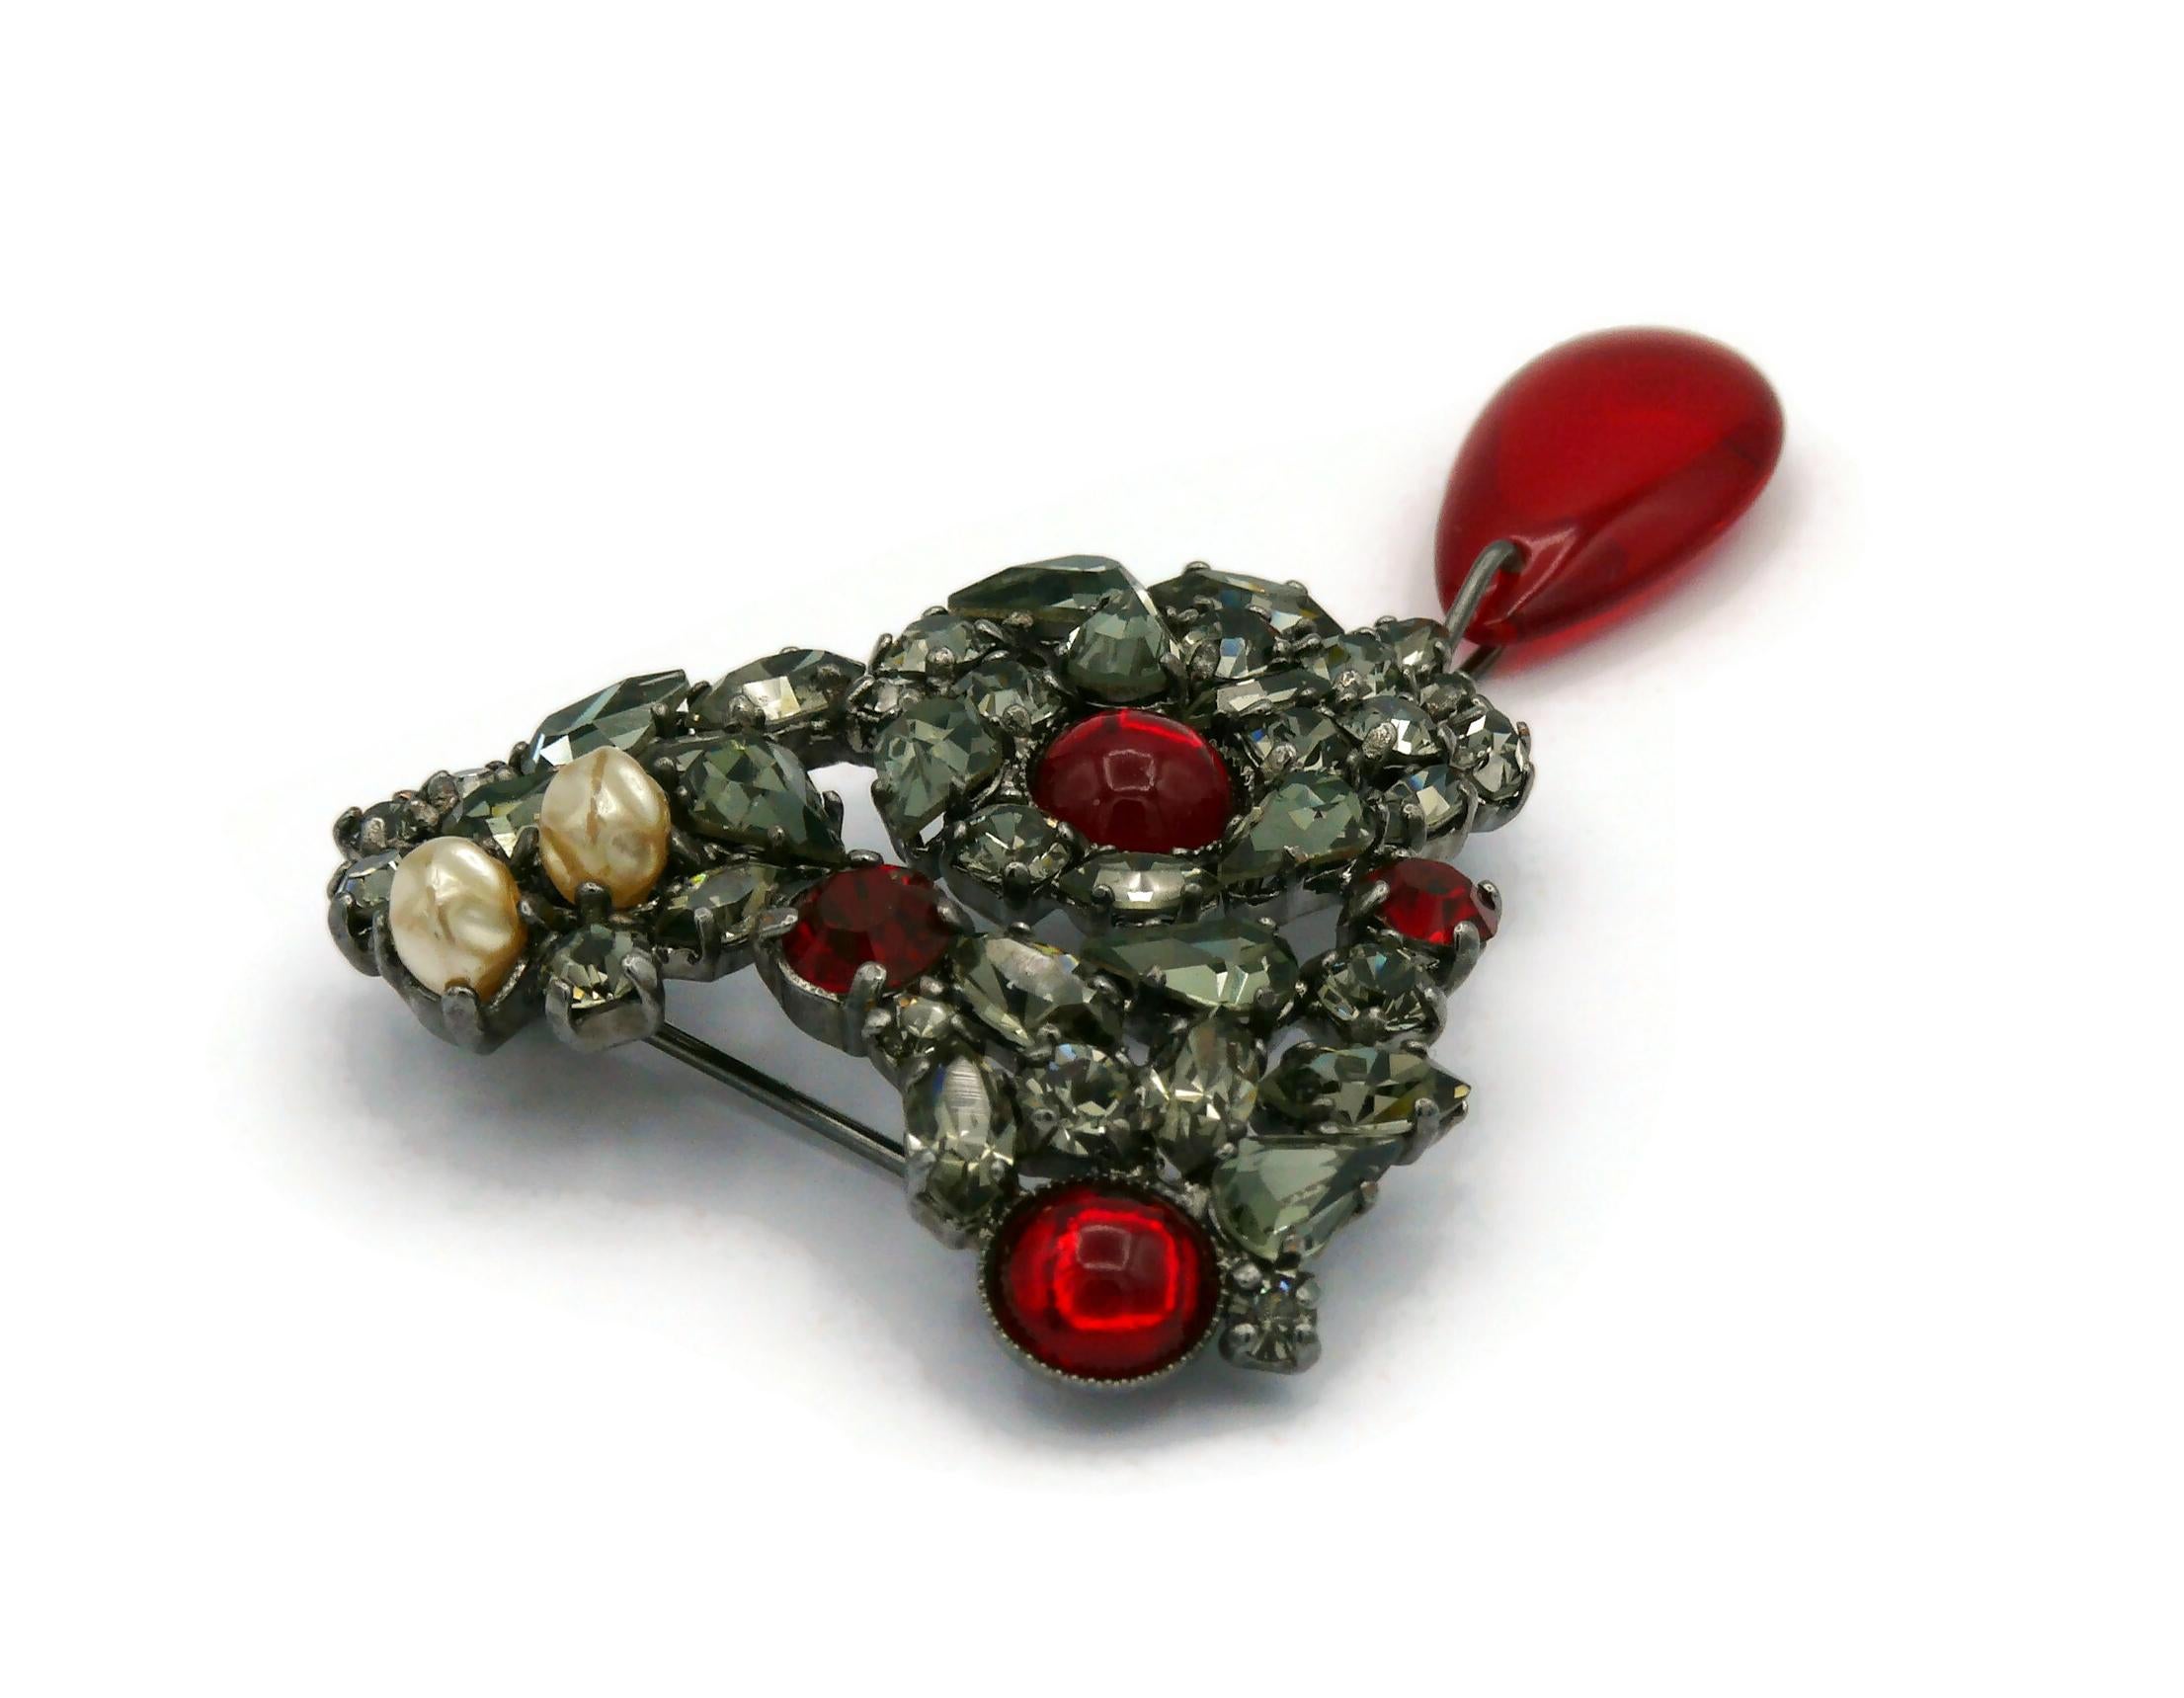 YVES SAINT LAURENT Haute Couture Iconic Bejeweled Heart Brooch 3